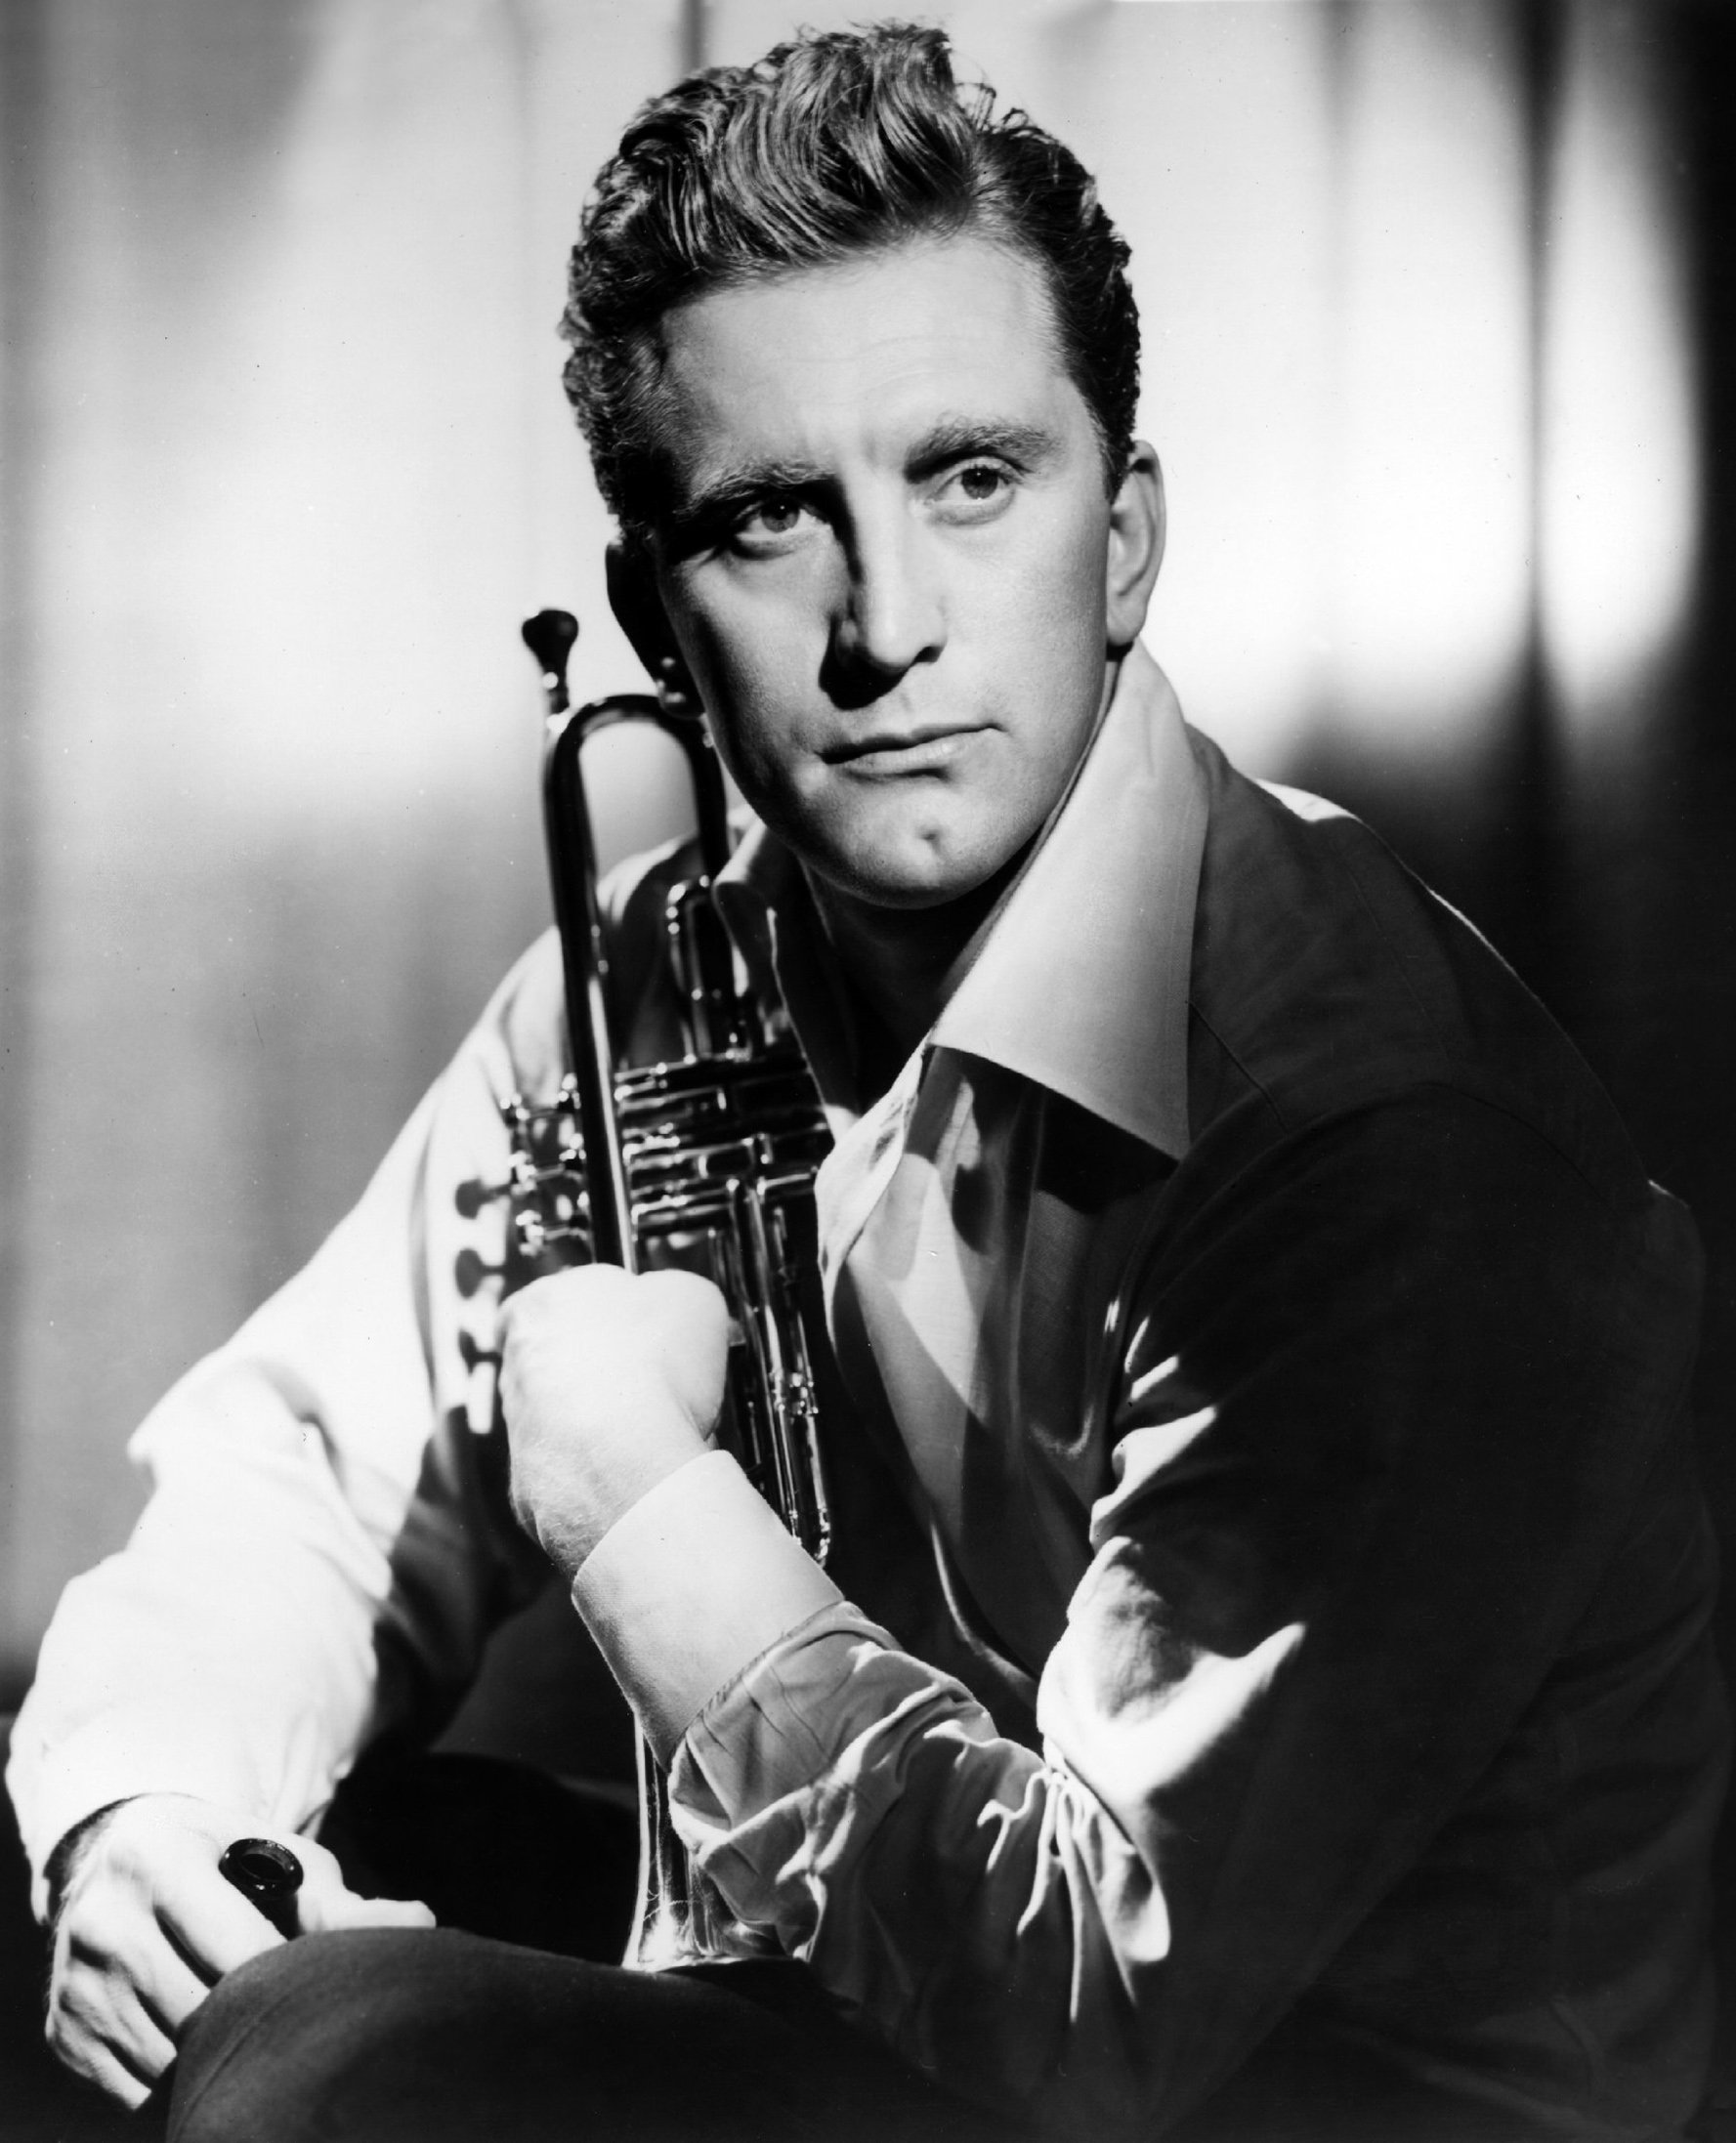 Kirk Douglas as Rick Martin holding a trumpet in the 1949 musical drama "Young Man with a Horn."  | Source: Getty Images